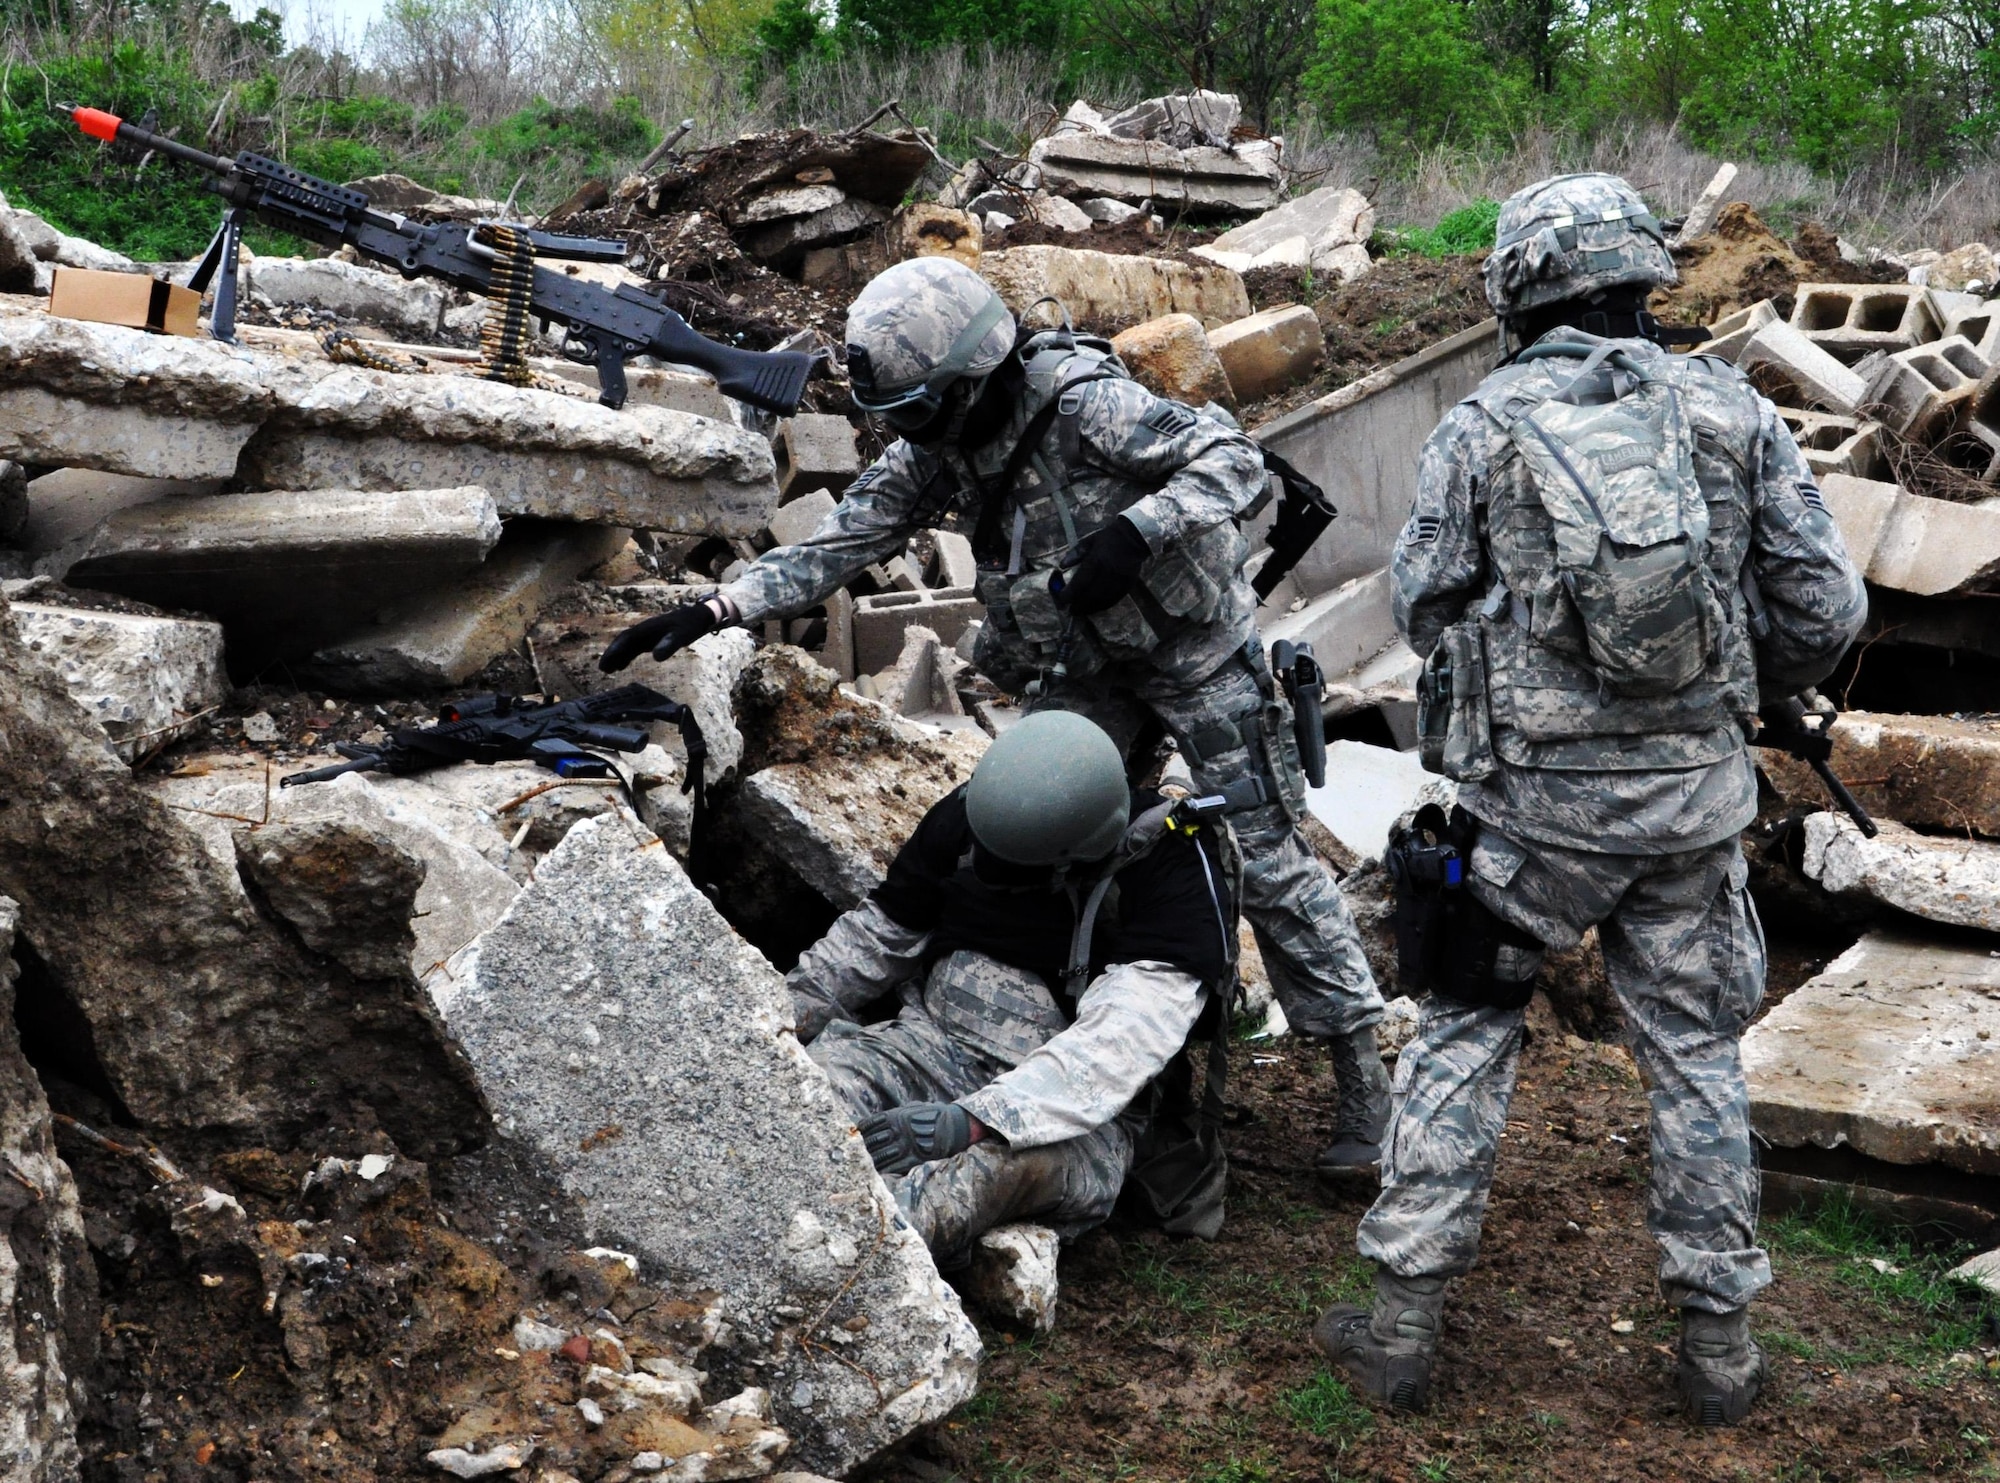 Members of the 931st Security Forces Squadron and 931st Civil Engineer Squadron search an "enemy" for intelligence information following a simulated firefight during a foot patrol training exercise at Camp Gruber Training Center, Okla., April 15, 2015.  The "enemy" was an Airman playing the role of an opposing force for the purposes of the training.  More than 80 members of the two squadrons participated in ten days of combat skills training at Camp Gruber, which included land navigation, weapons training, tactical movements, convoy operations, base defense, room clearing procedures, foot patrols, military operations on urban terrain (MOUT) and combat lifesaving.  (U.S. Air Force photo by Capt. Zach Anderson)
